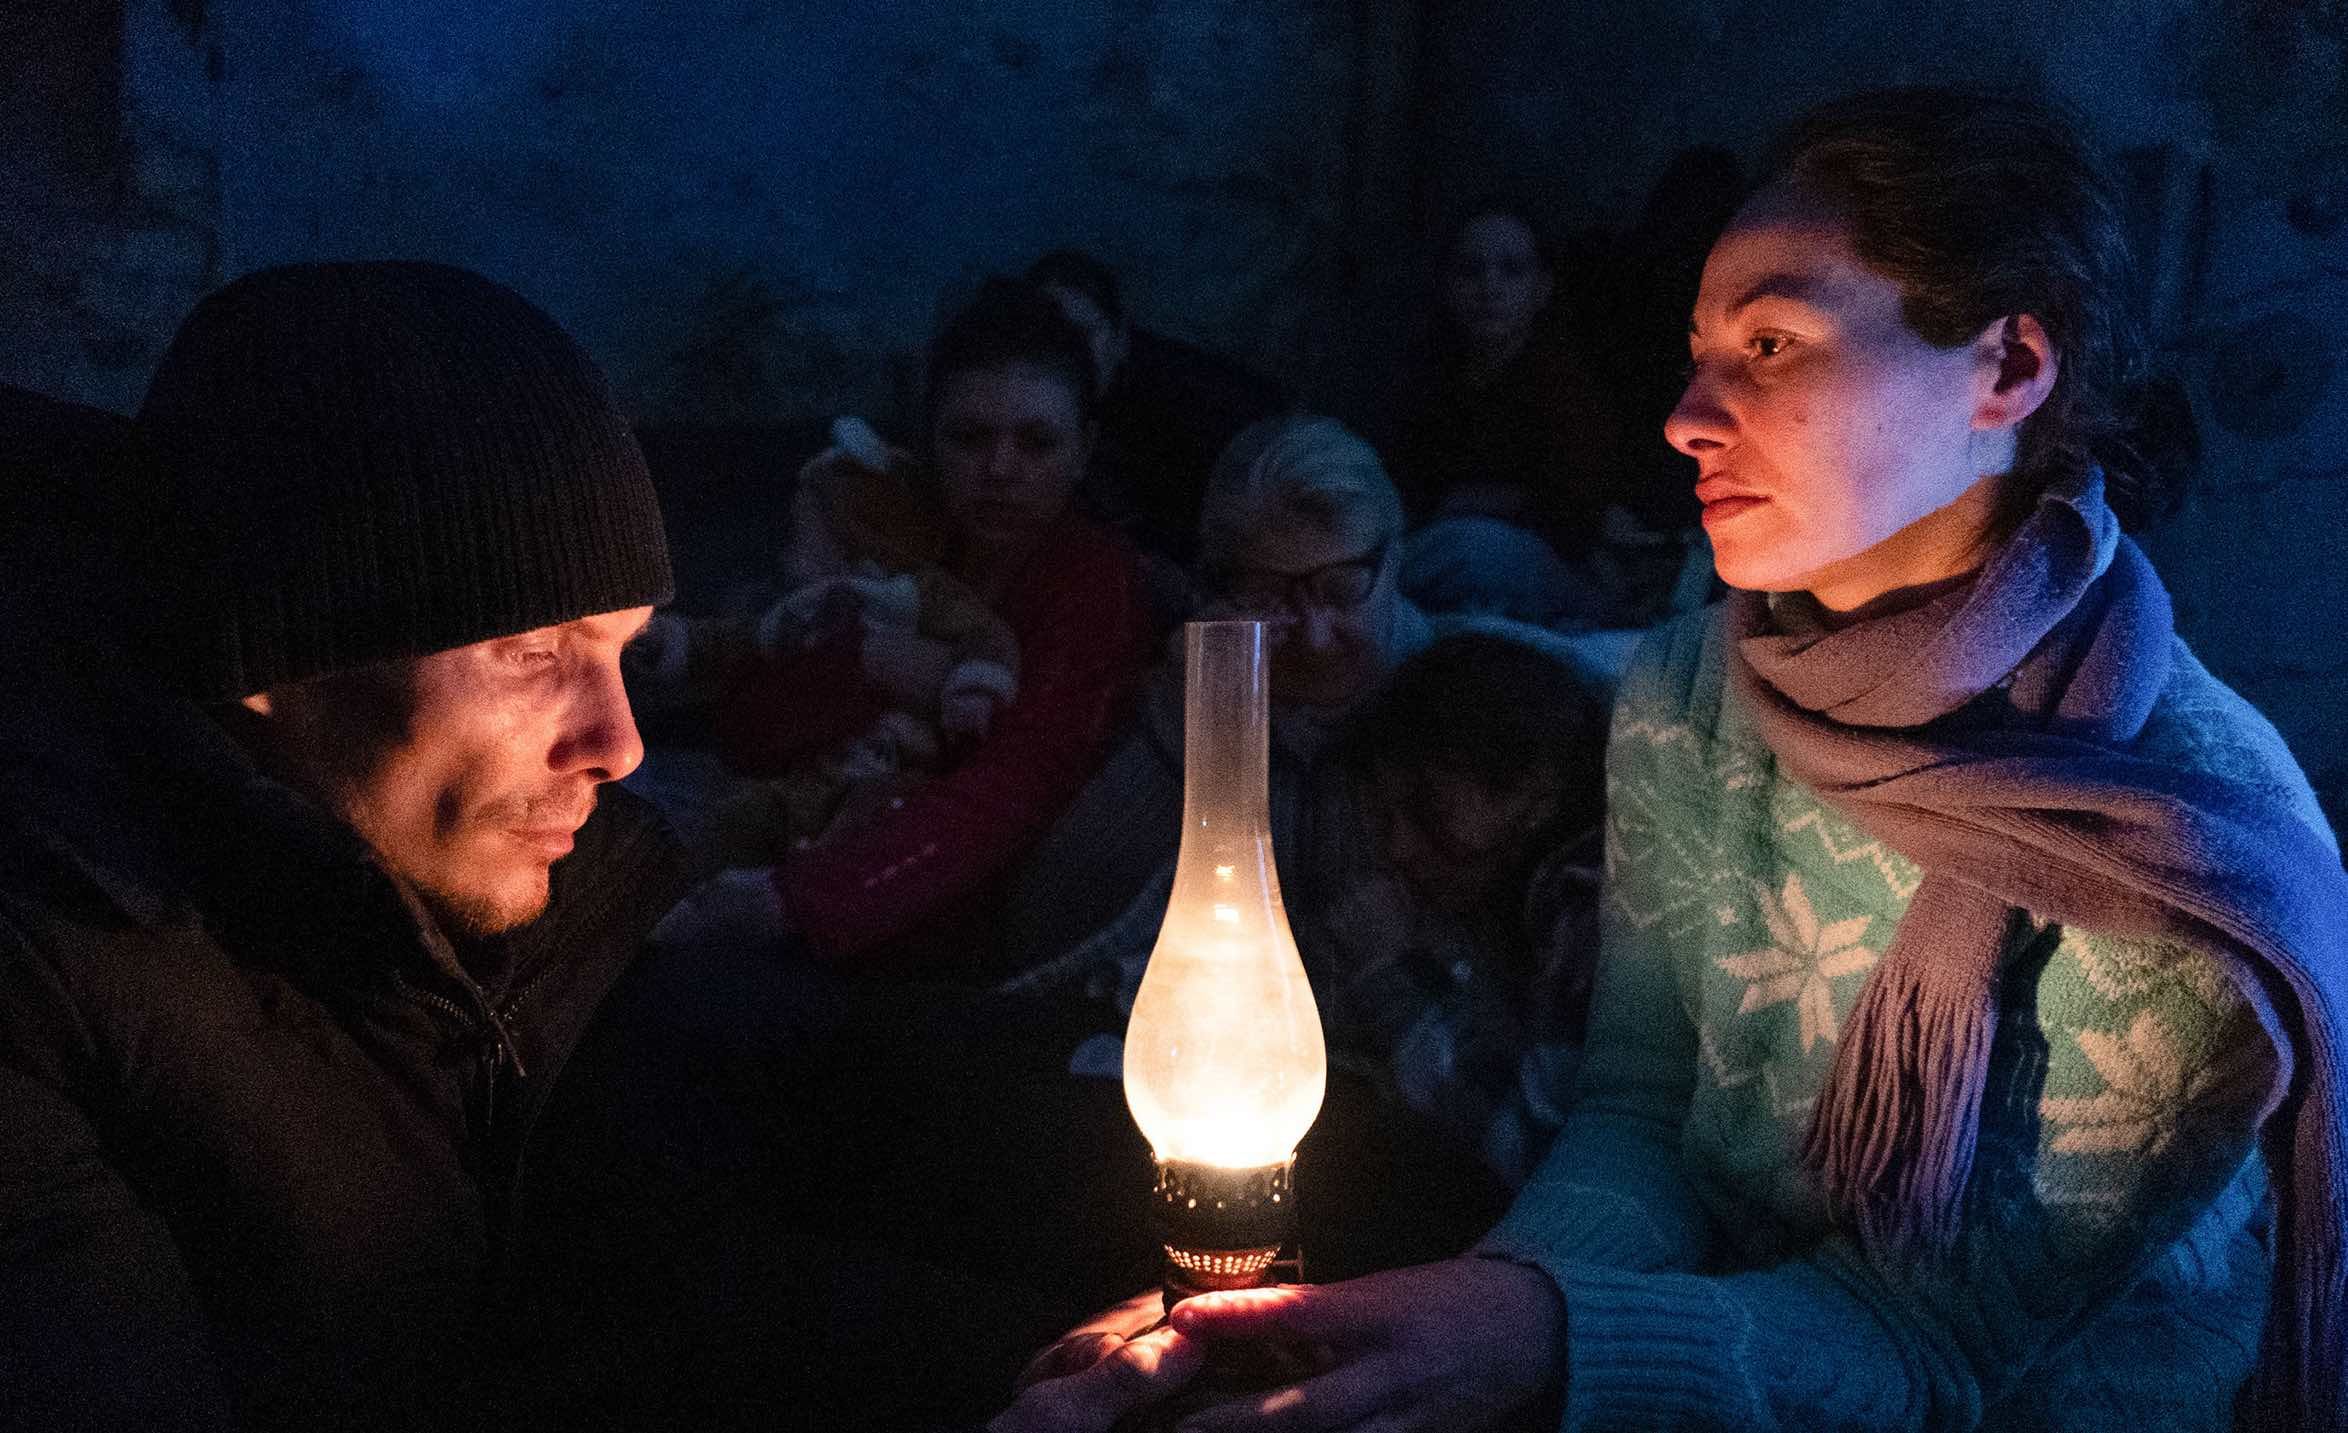 Taking shelter: civilians find safety where they can in 20 Days in Mariupol / AP Photo by Mstyslav Chernov, courtesy of Sundance Institute